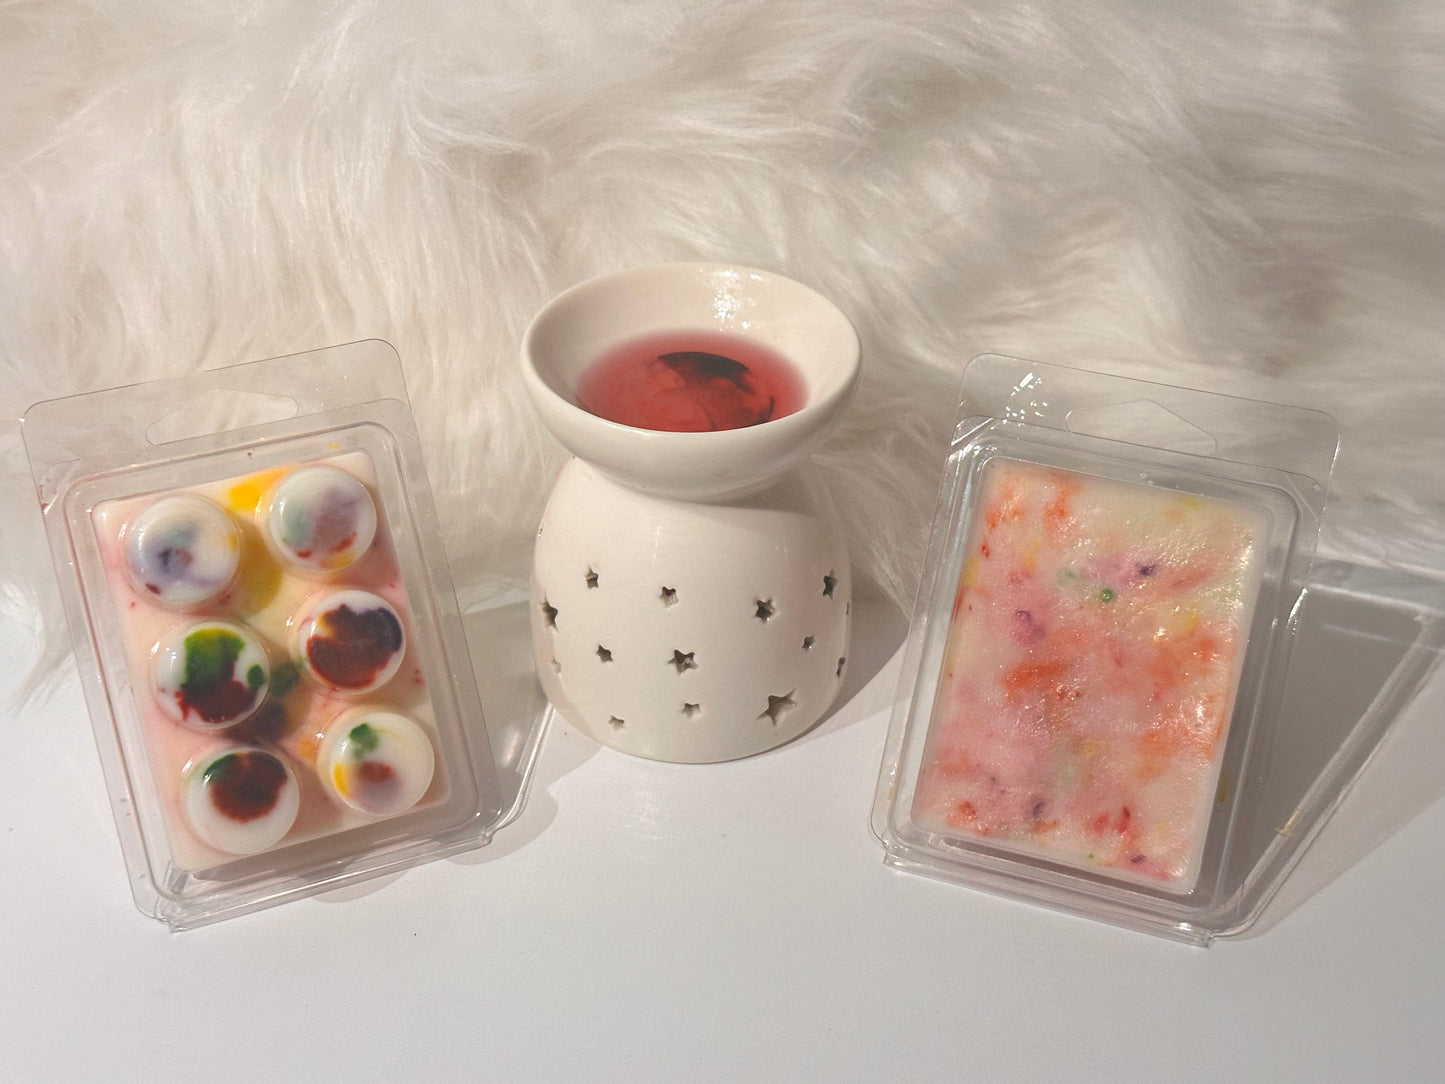 Tutti Fruity Heart Wax Melt Bars: A Kaleidoscope of Scents for Your Senses